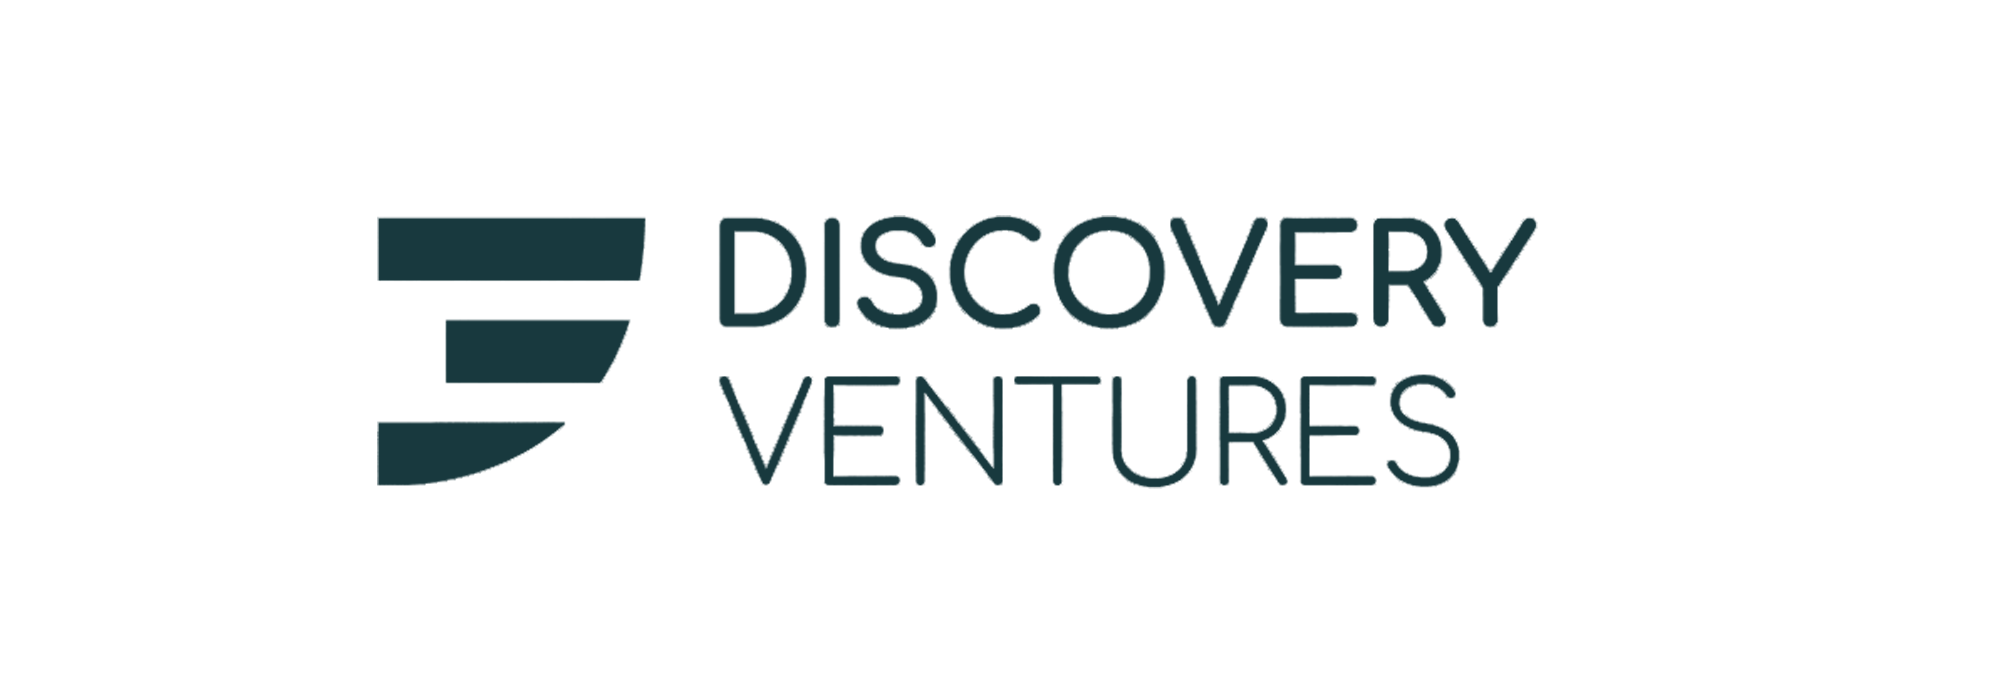 discovery ventures